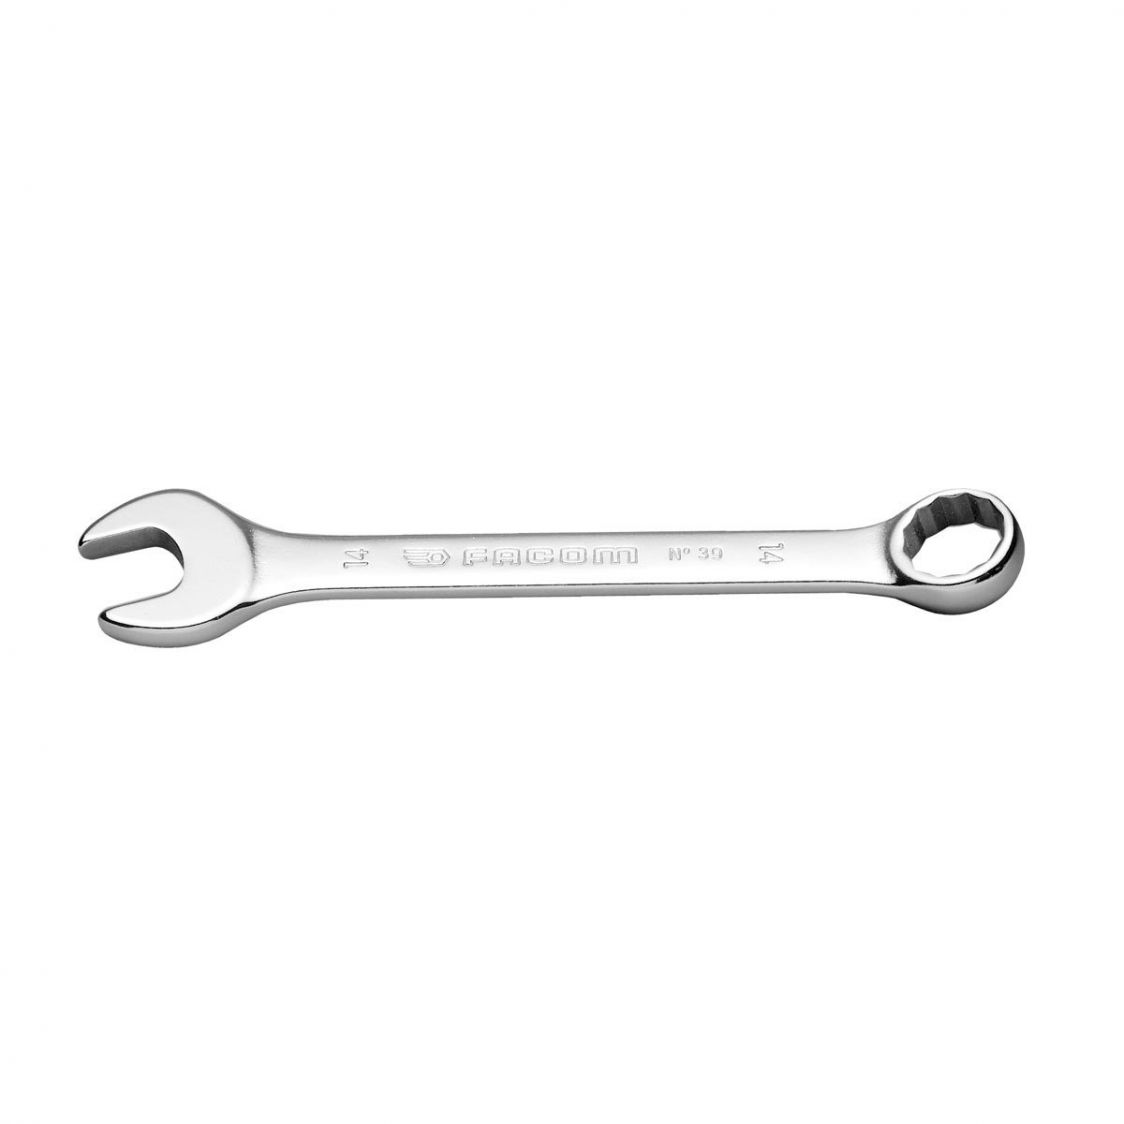 FACOM 39.6 - 6mm Metric Stubby Combination Spanner